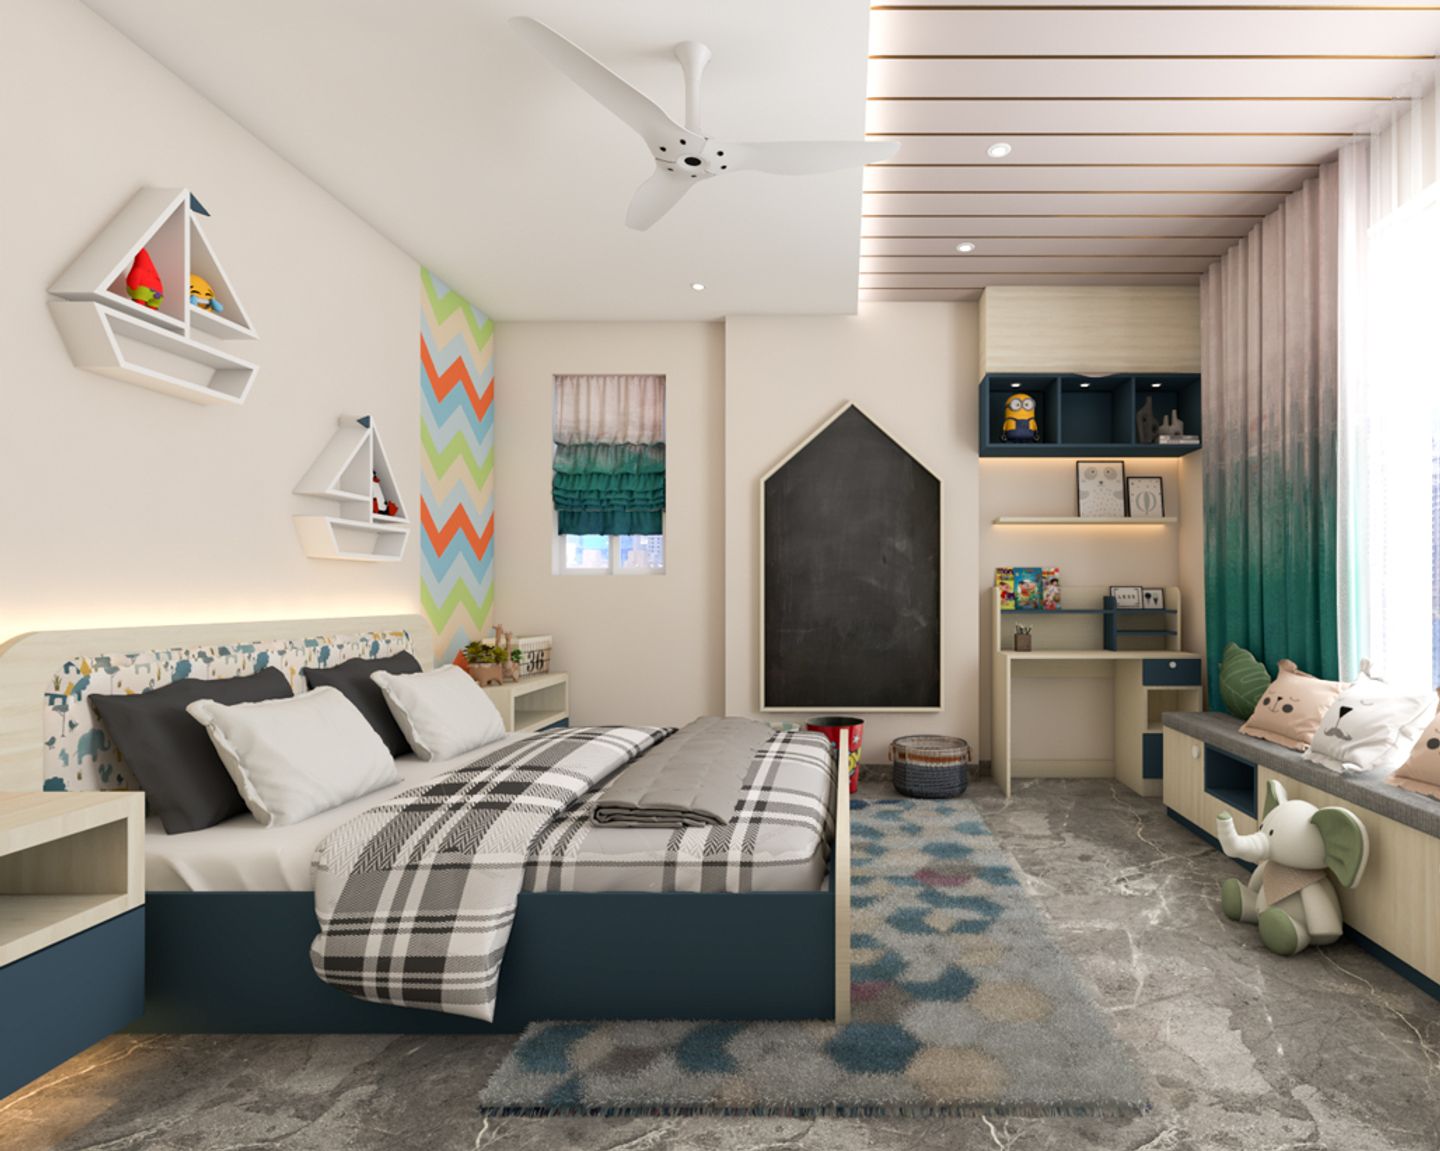 Multifunctional-Modern Kids Bedroom Design With Colourful Interiors - Livspace